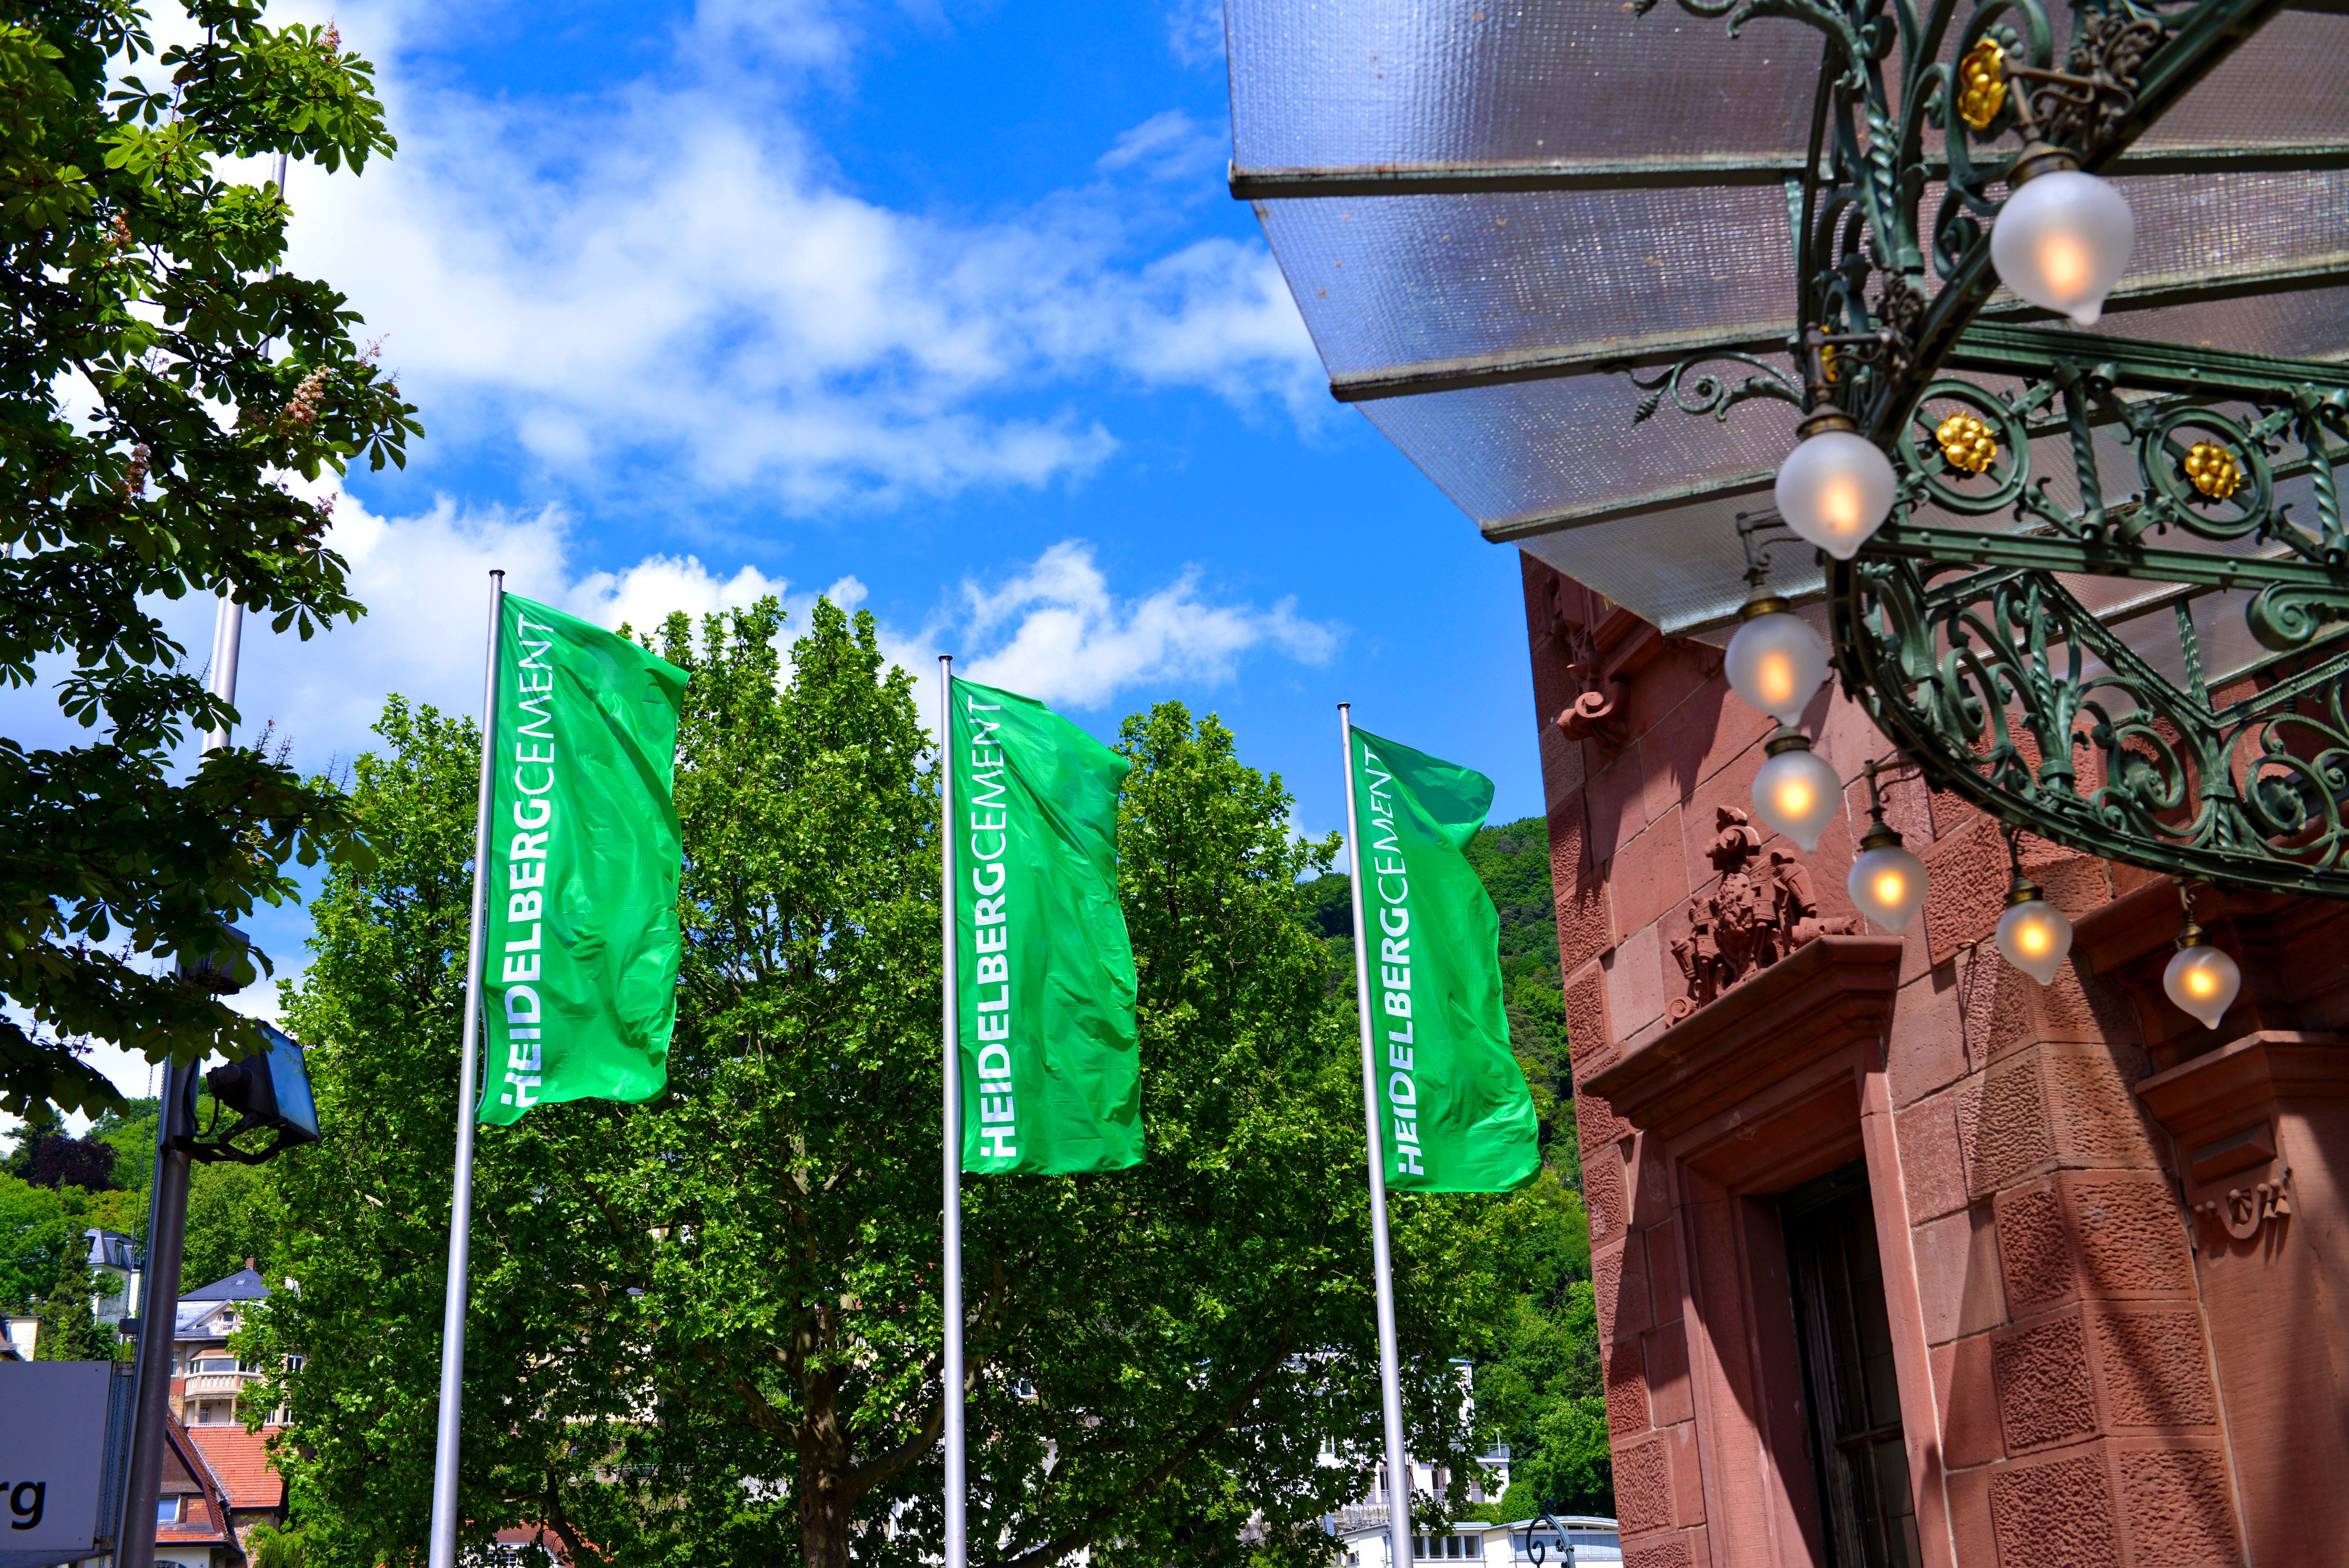 Three green flags with HeidelbergCement lettering next to a sandstone facade, in front of green trees